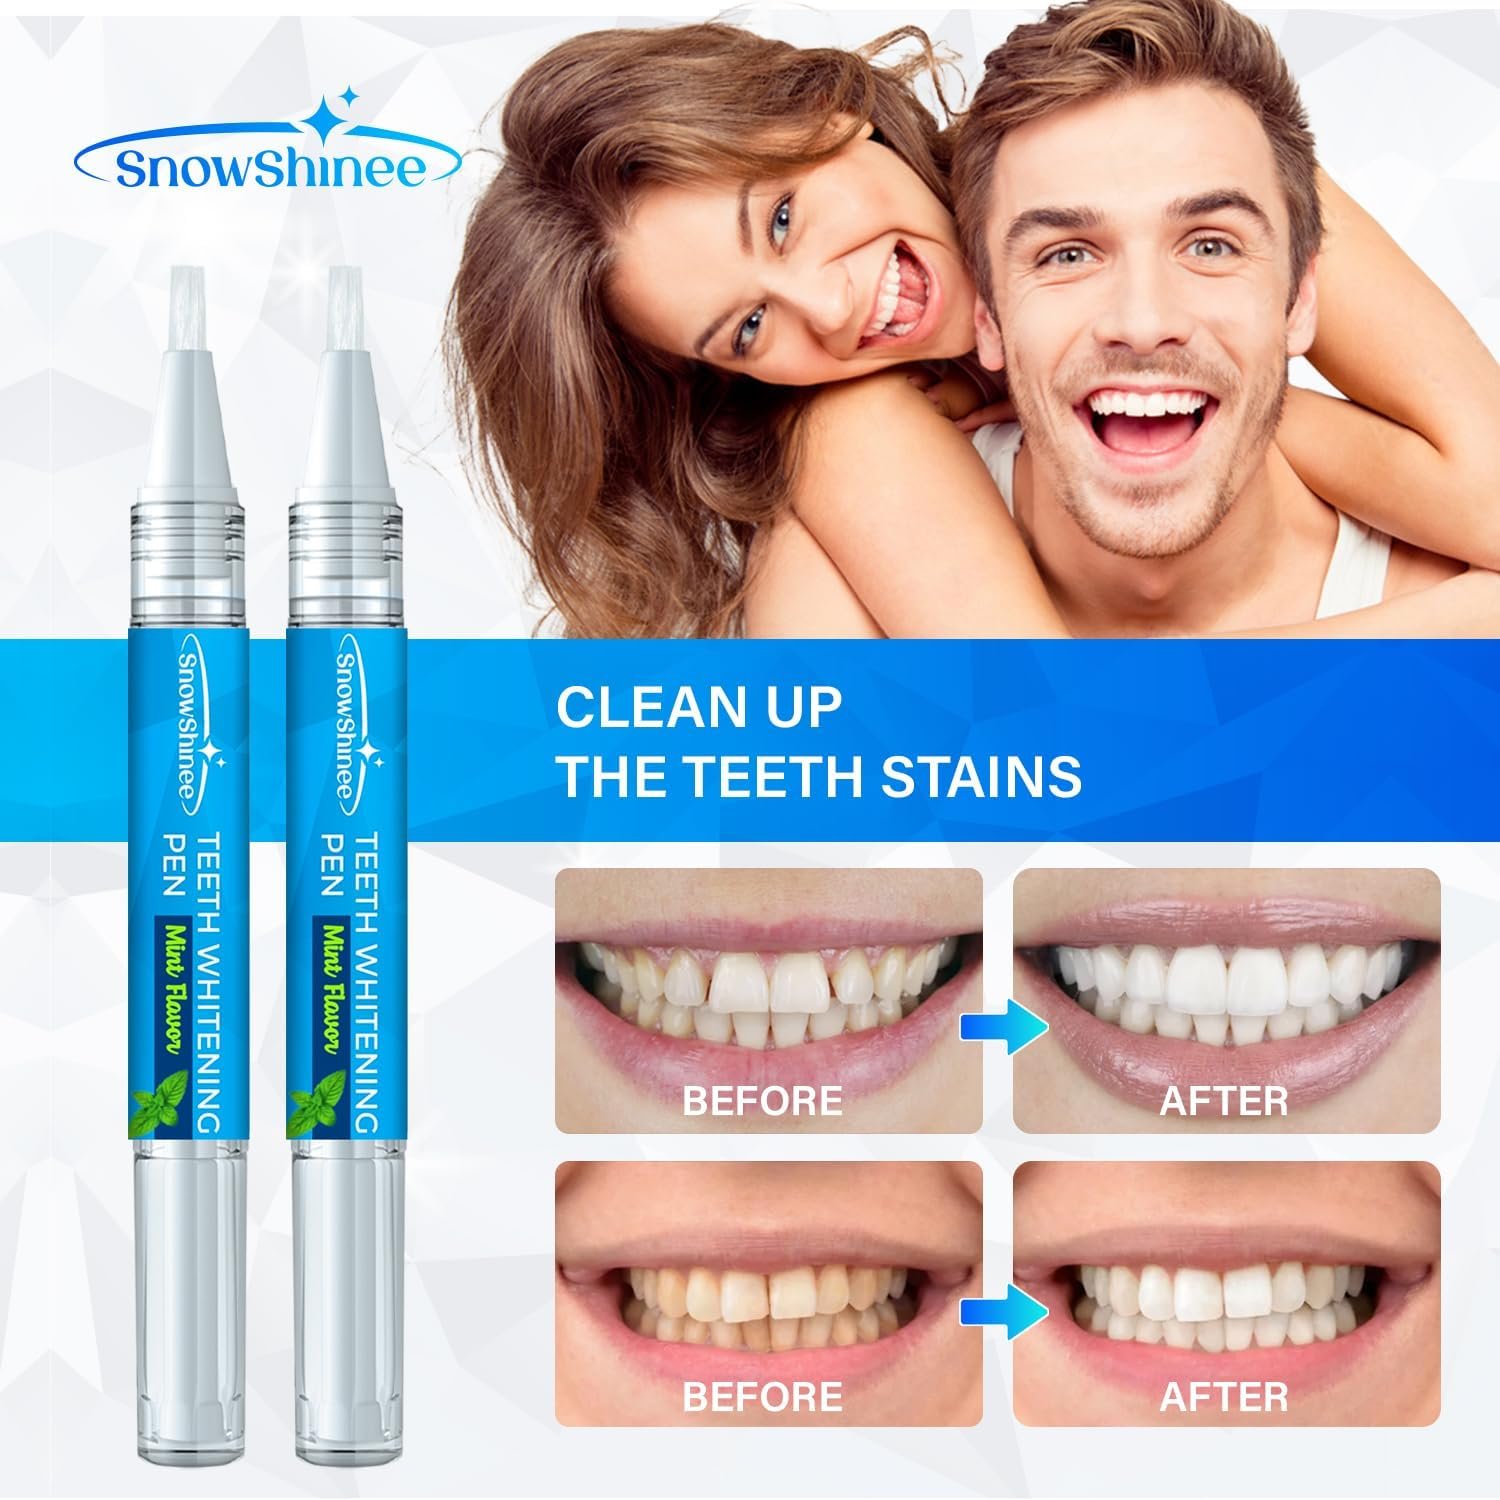 Teeth Whitening Pen, Teeth Whitening Kit, Teeth Whitening Gel with applicator, Teeth Whitener, Teeth Stain Remover, 40+ Uses, Easy to Use, Painless, No Sensitivity, Beautiful White Smile, Mint- 4 Pens